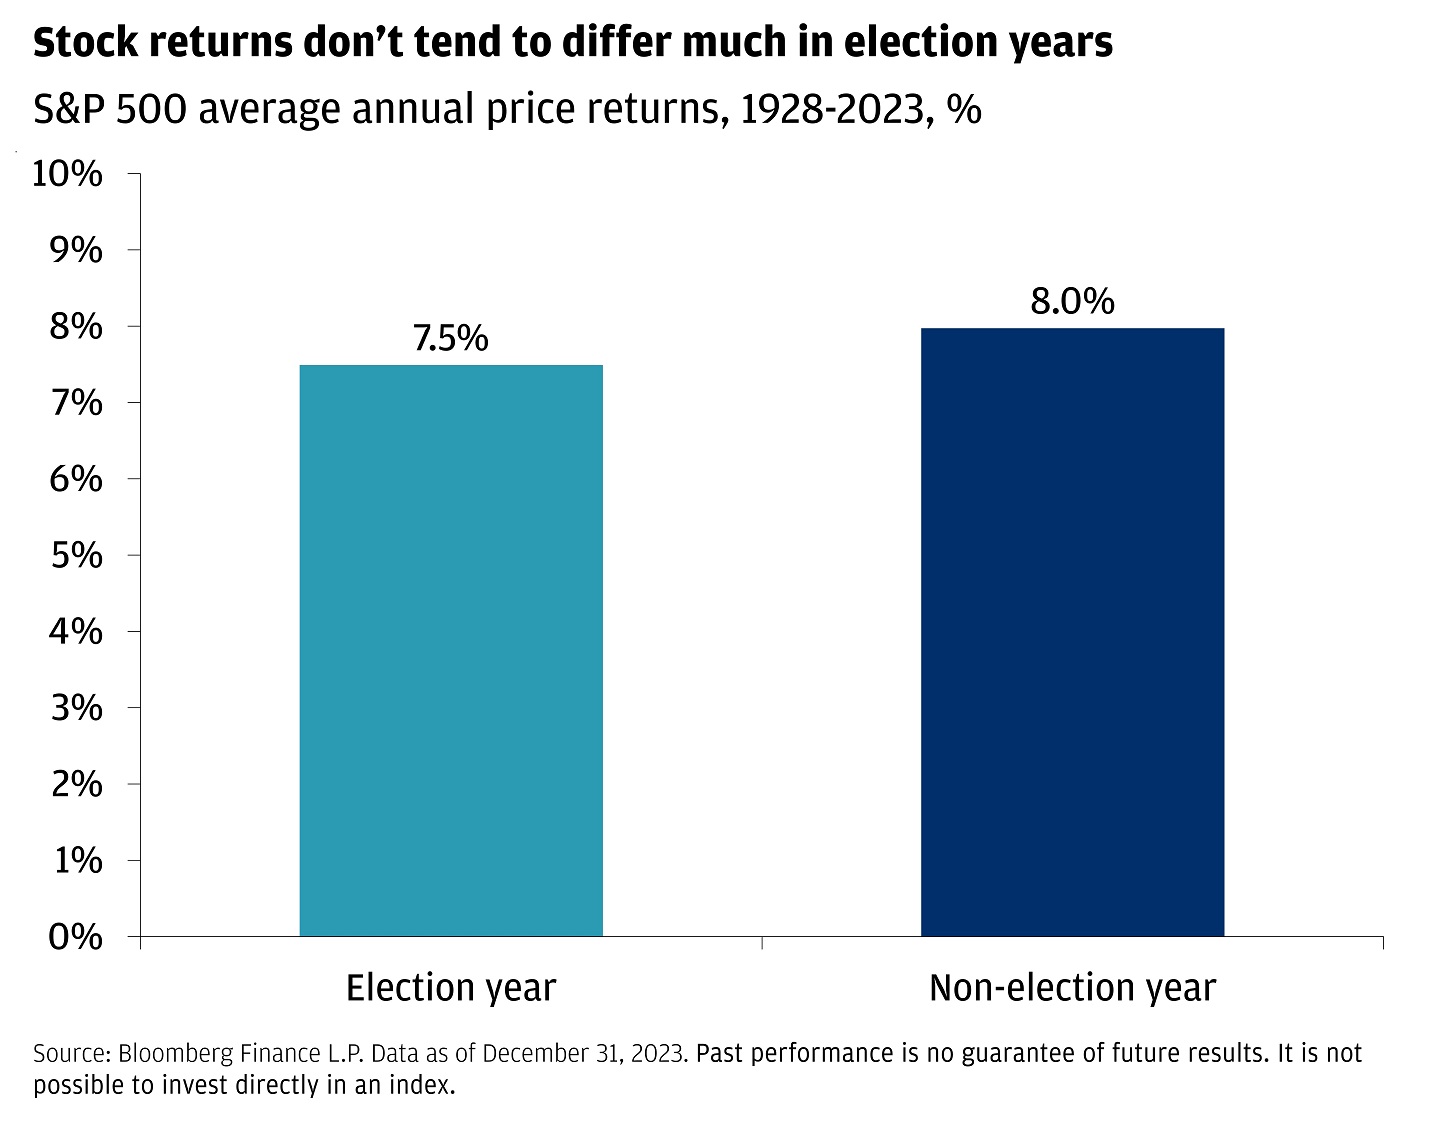 Bar chart showing the S&P 500 average annual price returns from 1926-2023 in election years and non-election years.